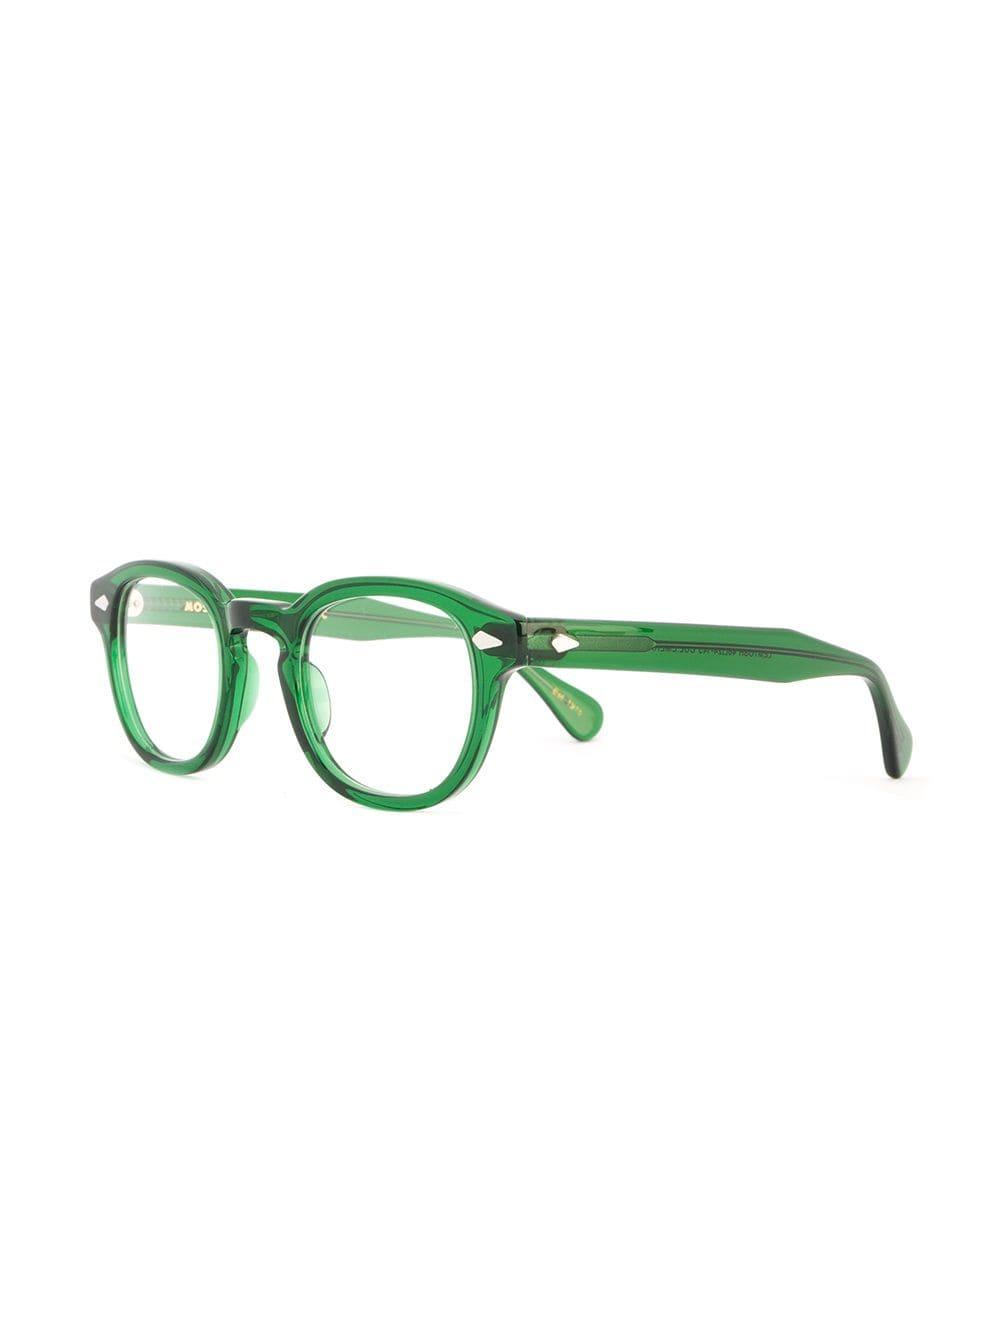 Moscot 'lemtosh' Glasses in Green - Lyst